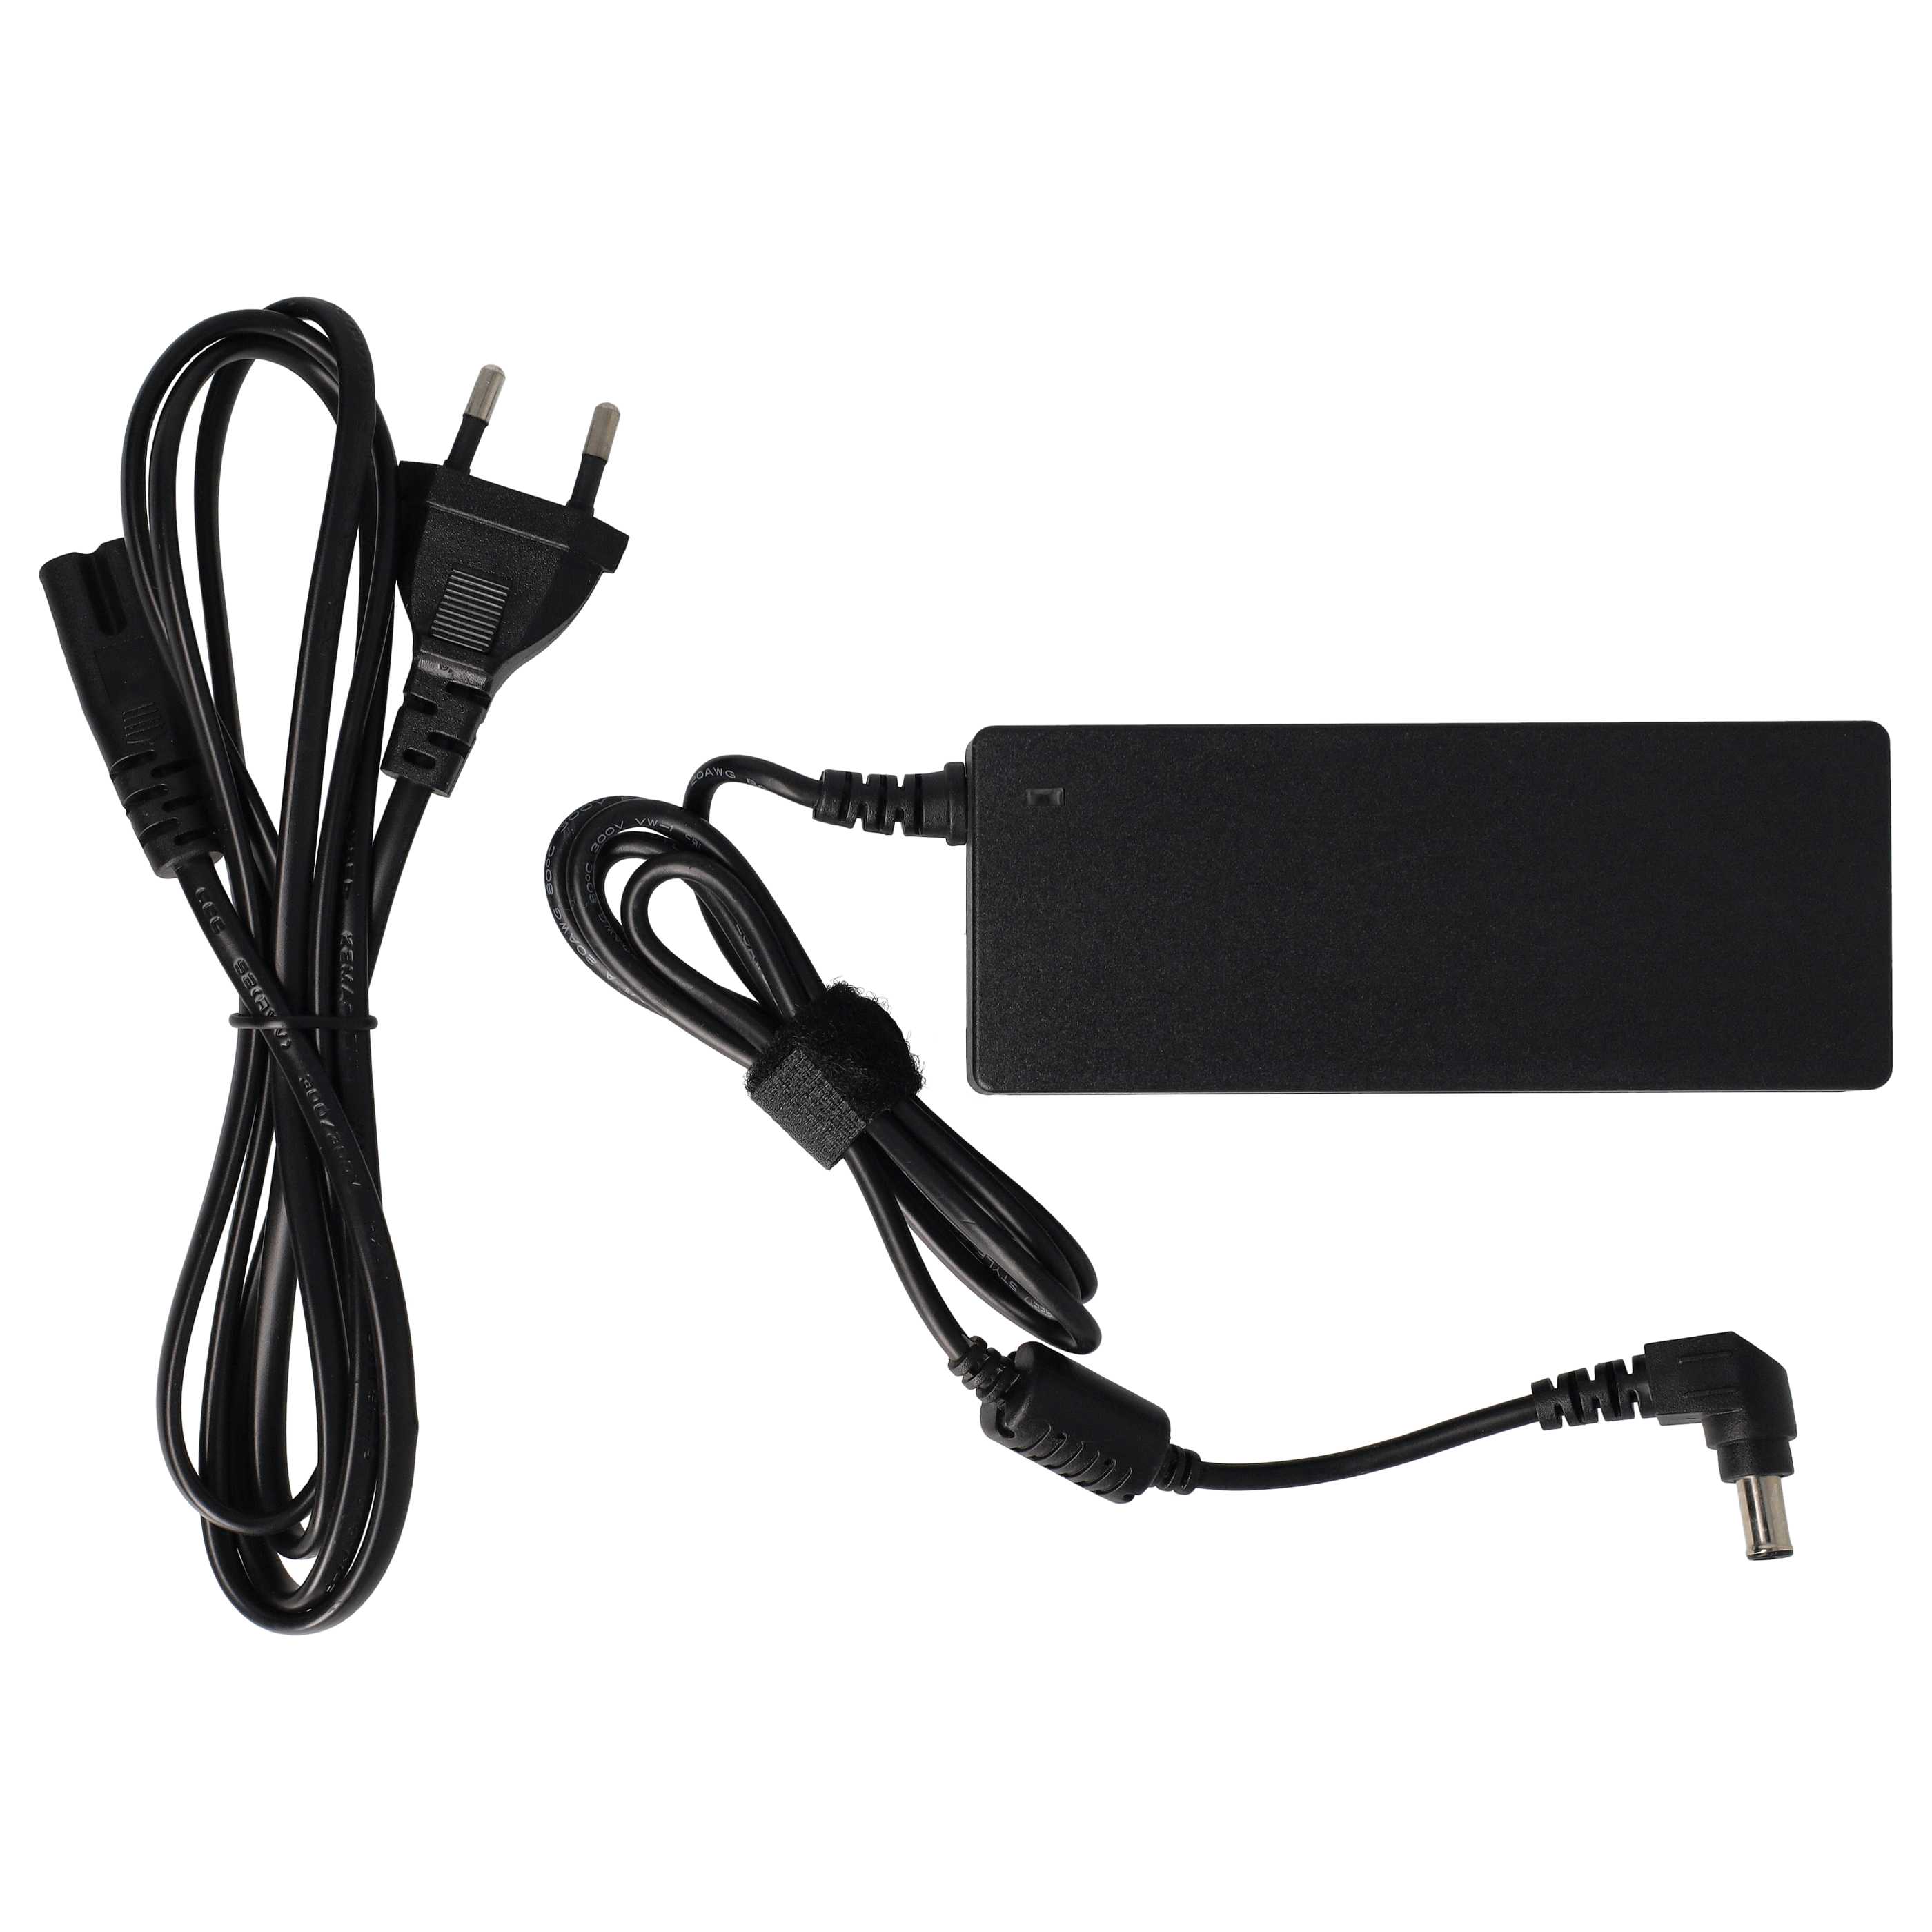 Mains Power Adapter replaces Sony PCGA-AC16V3, PCGA-AC16V4, PCGA-AC16V6, PCGA-AC16V1 for SonyNotebook, 64 W